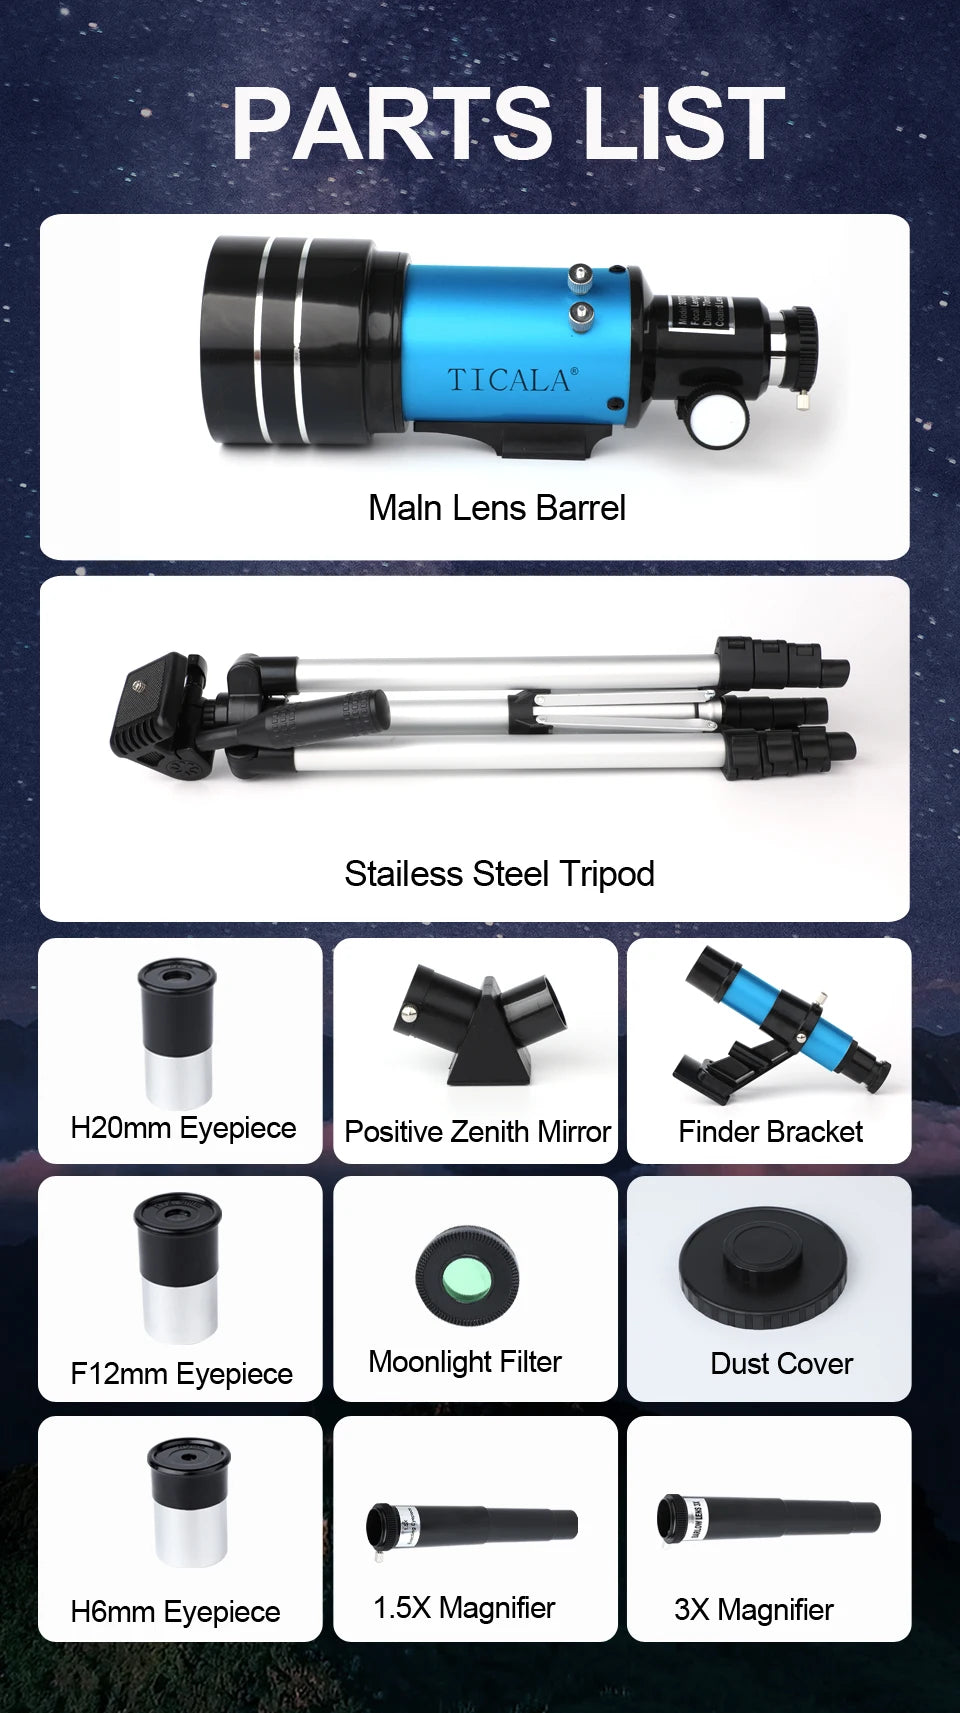 Best Telescope for 11 Year Old Kid